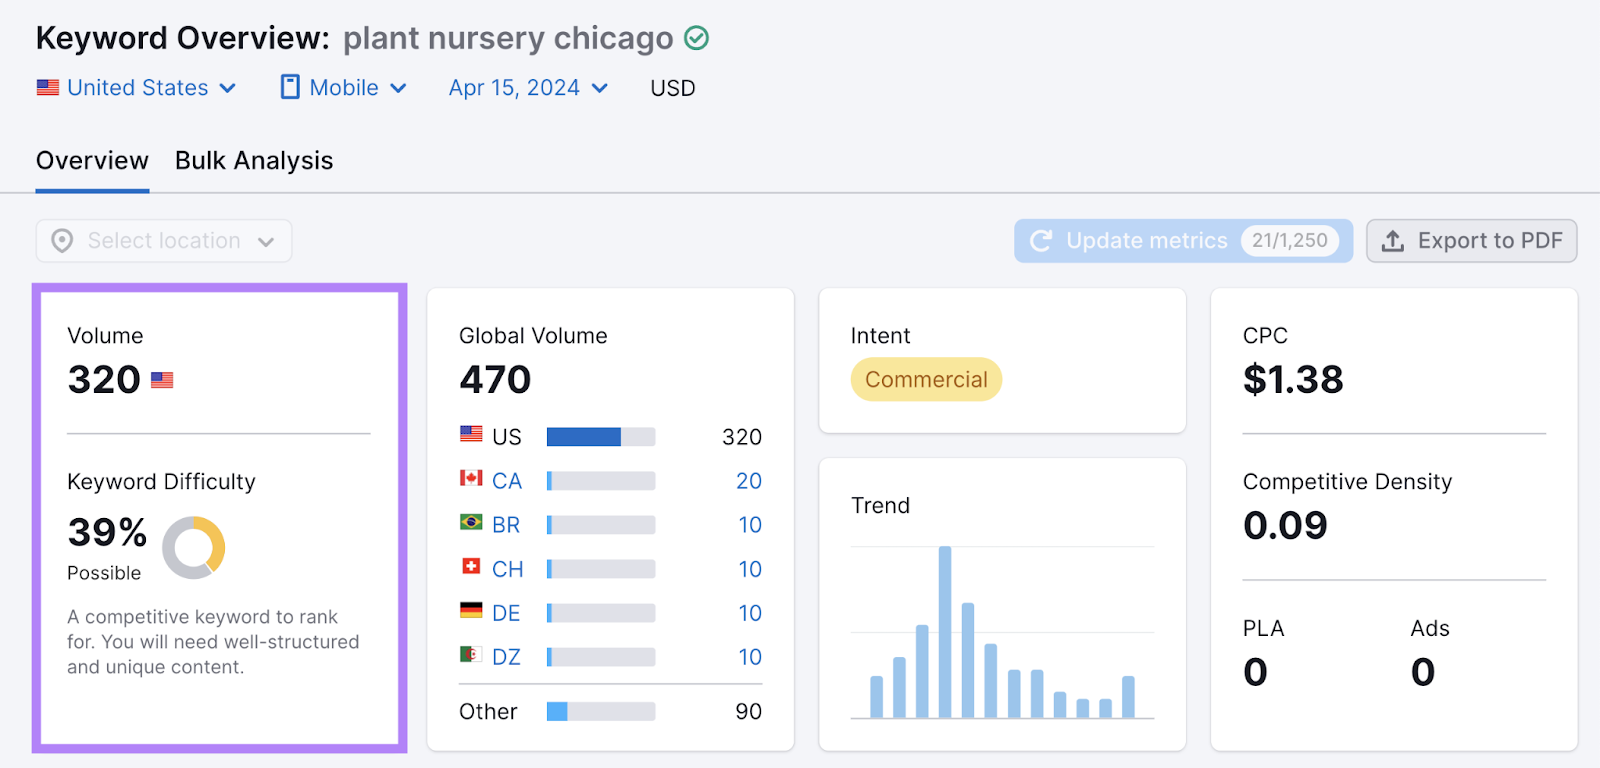 volume is 320 and keyword difficulty is 39% for keyword "plant nursery chicago"